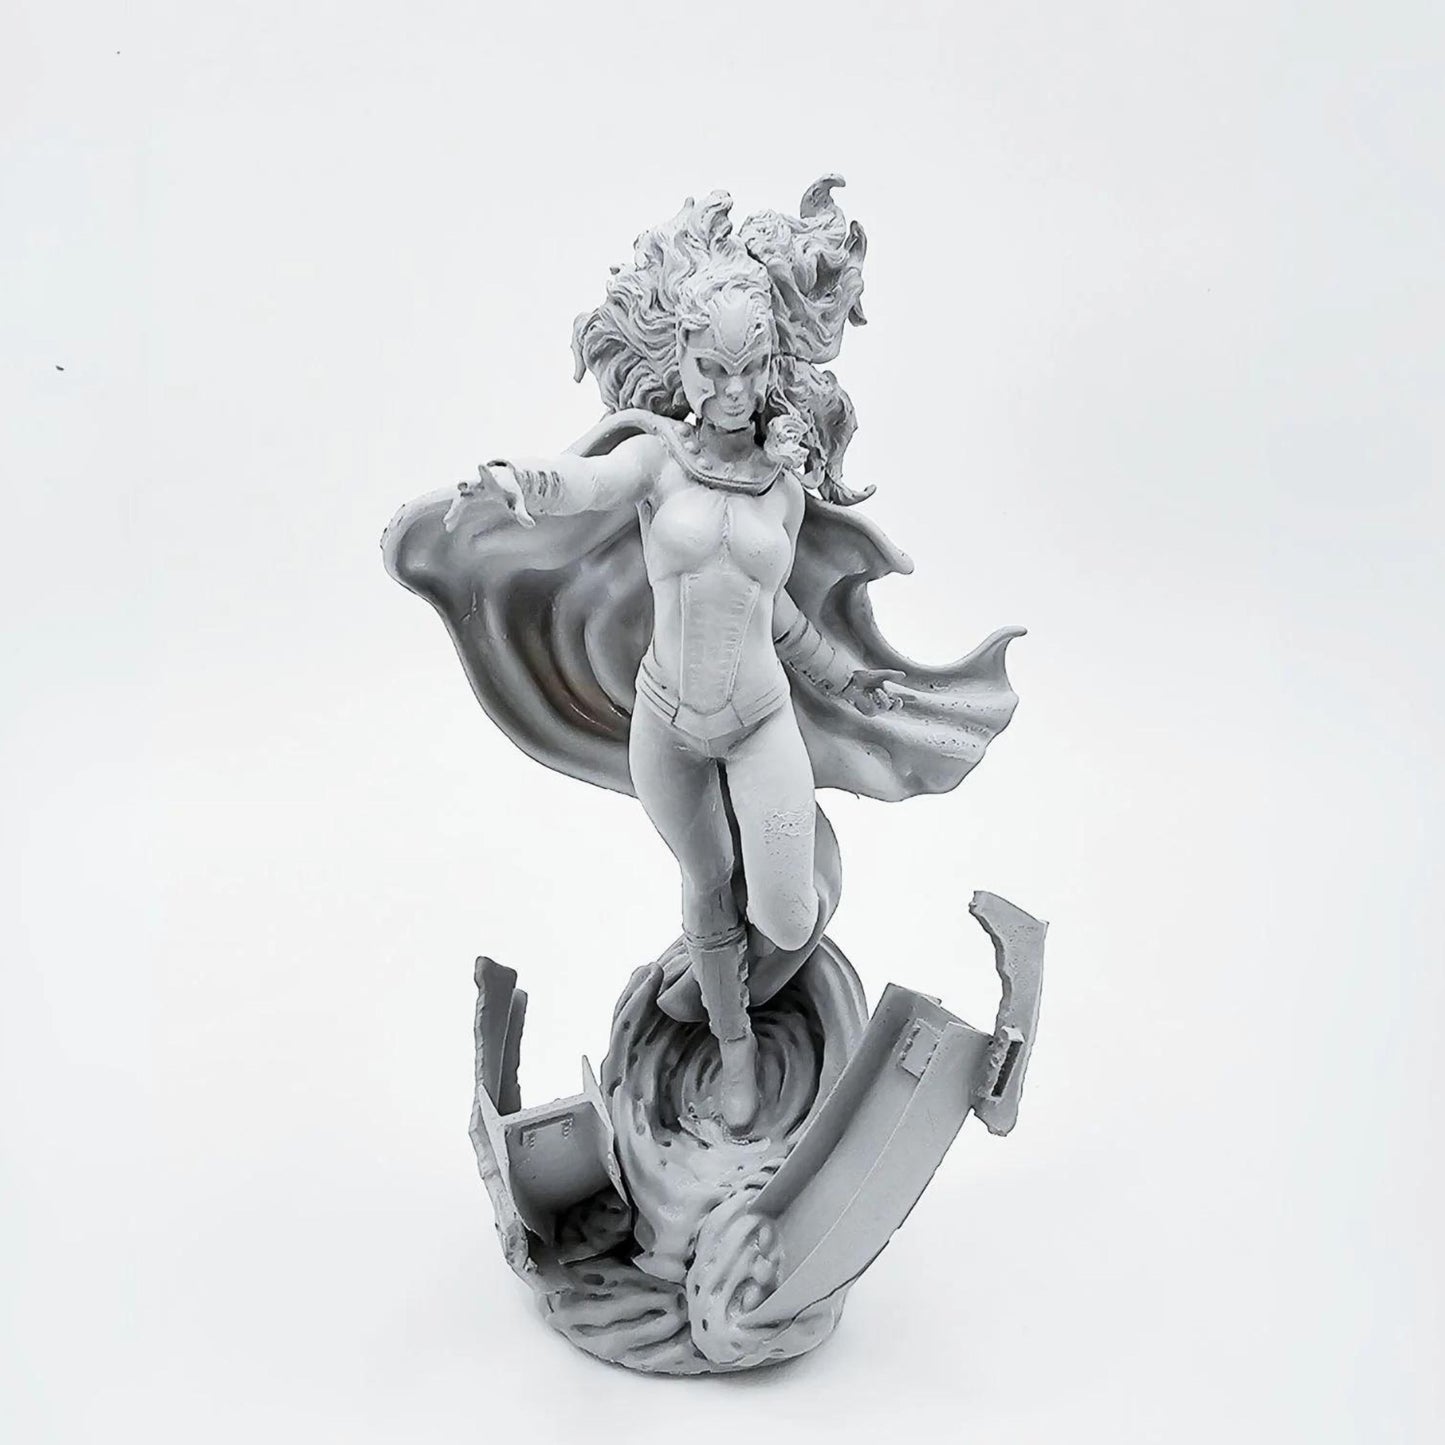 18+ Collector's 3D Printed Model: 1/24 Resin model kits figure beauty colorless and self-assembled